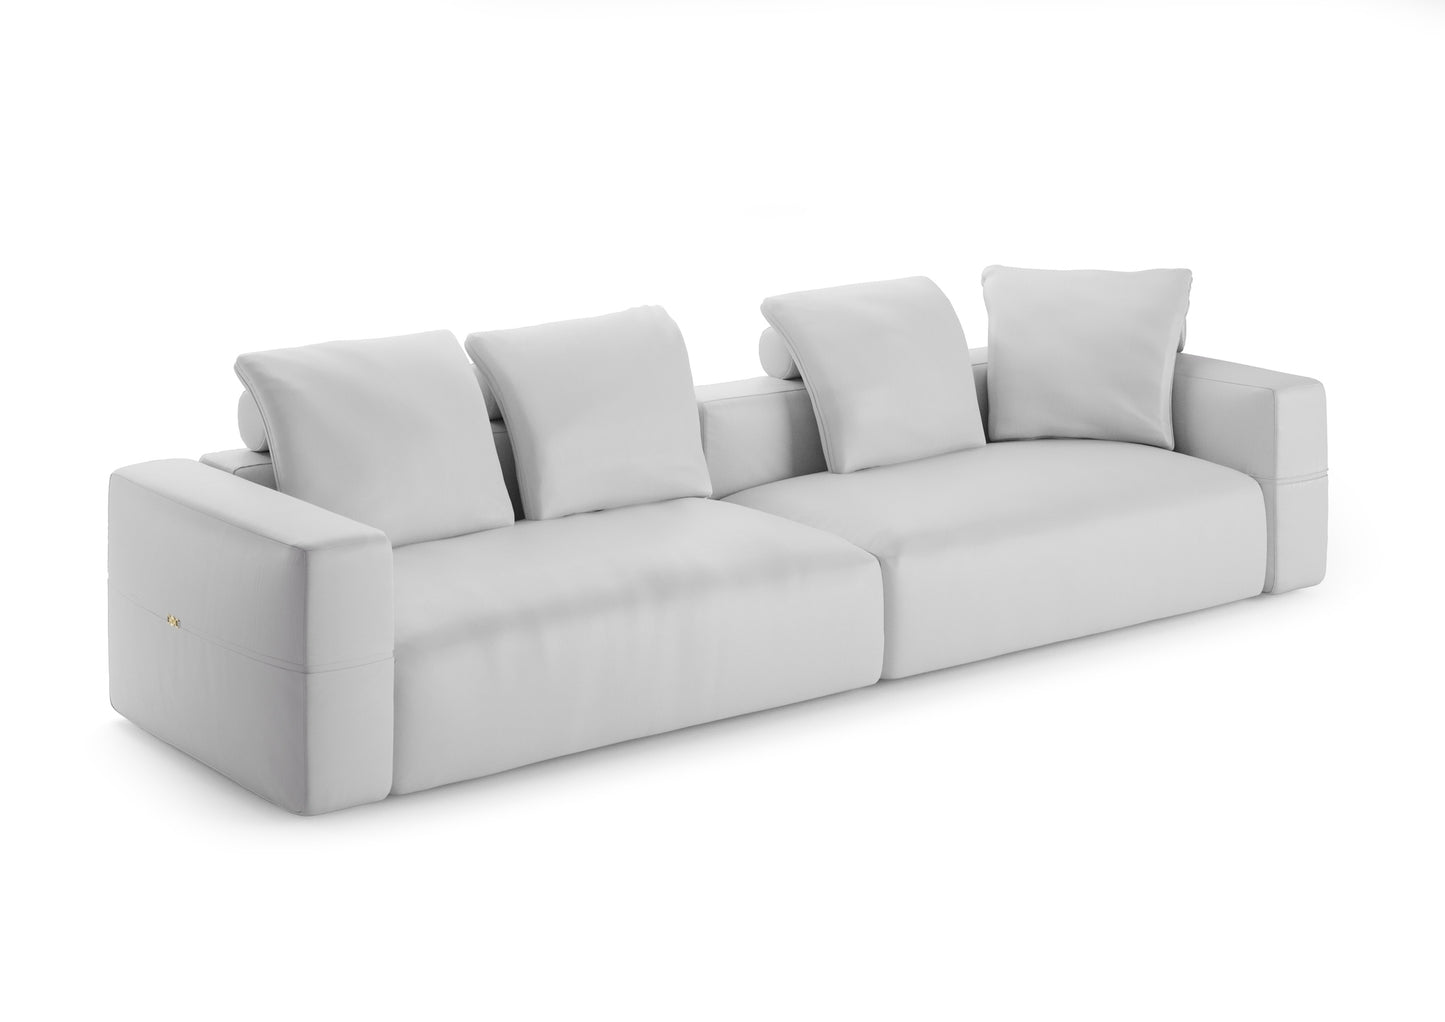 Versace Home - Medusa '95 Sectional sofa front picture